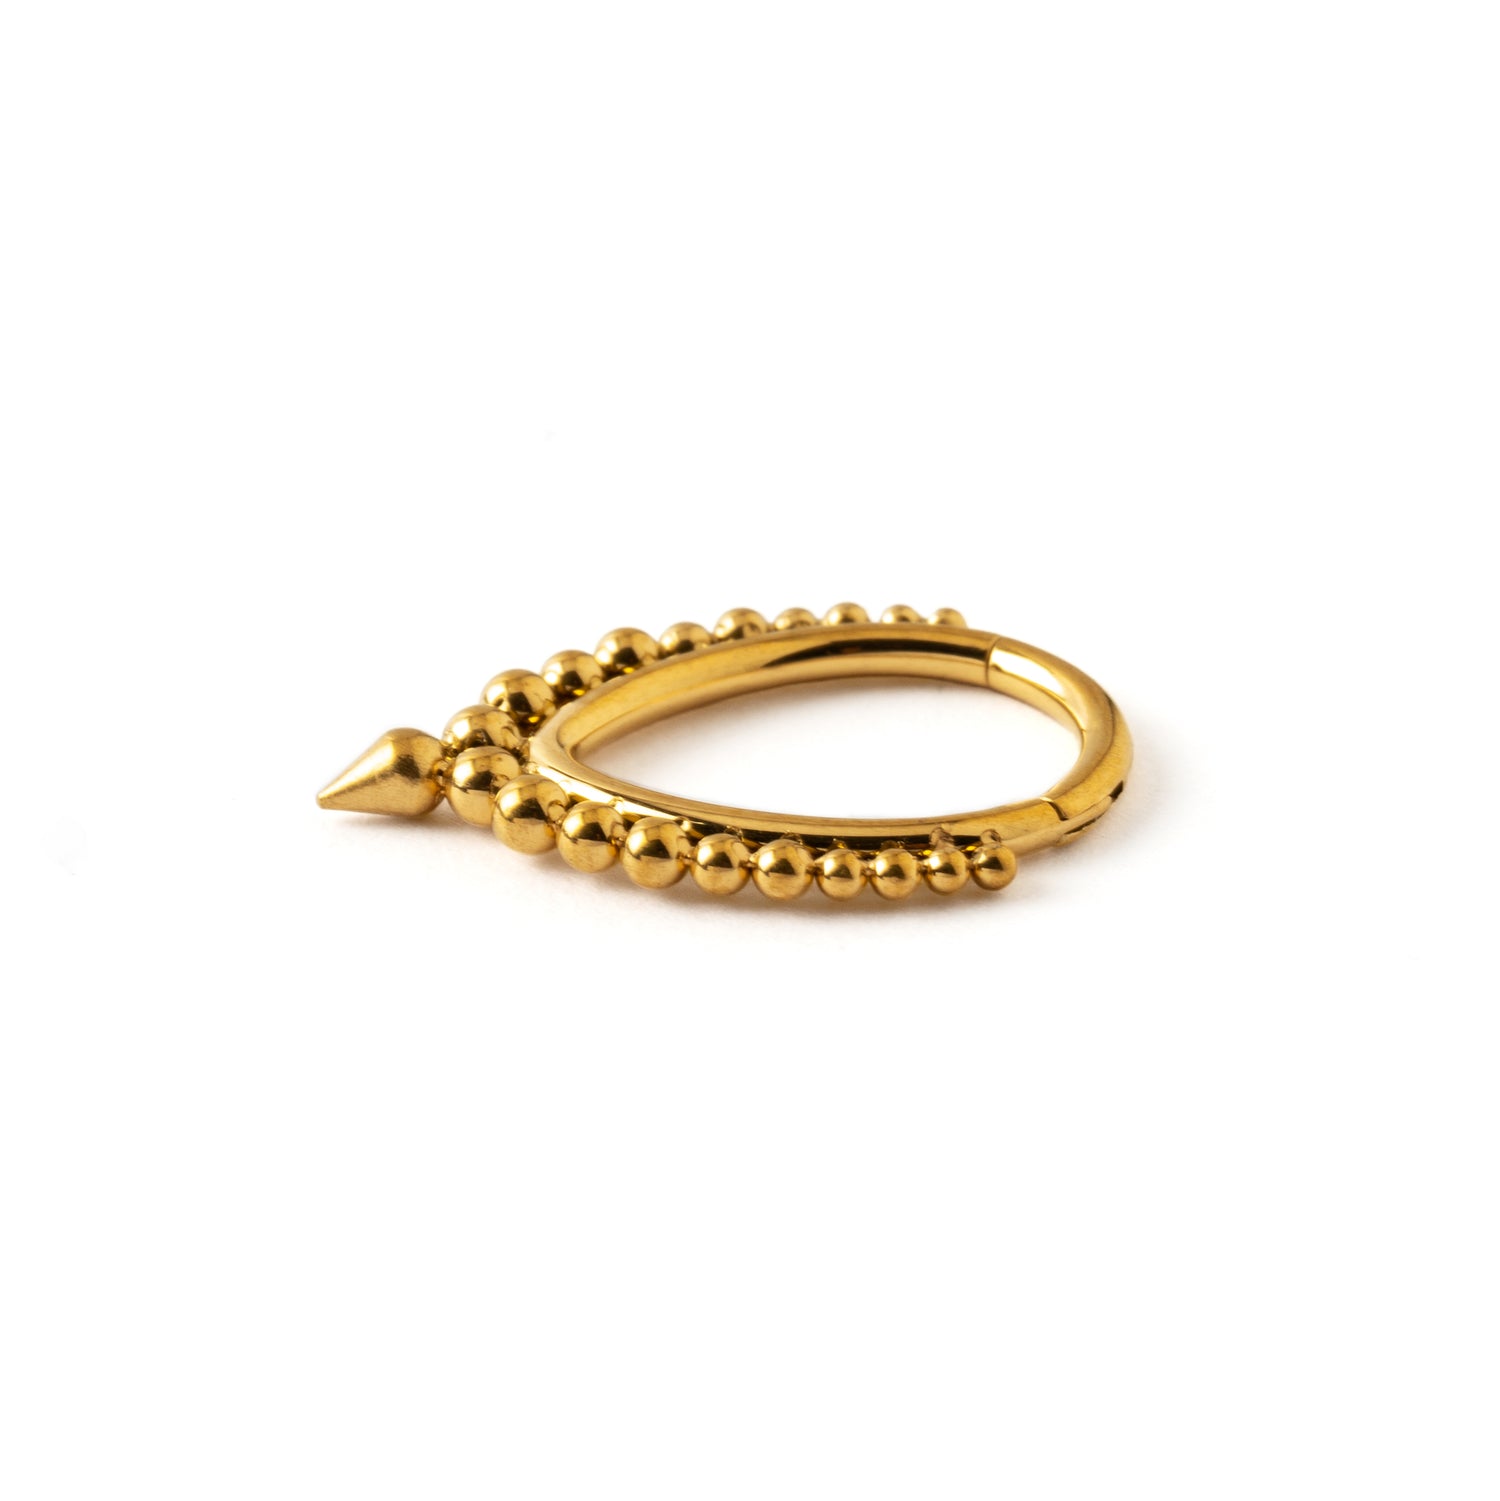 Brenna Golden surgical steel Septum Clicker ring side view